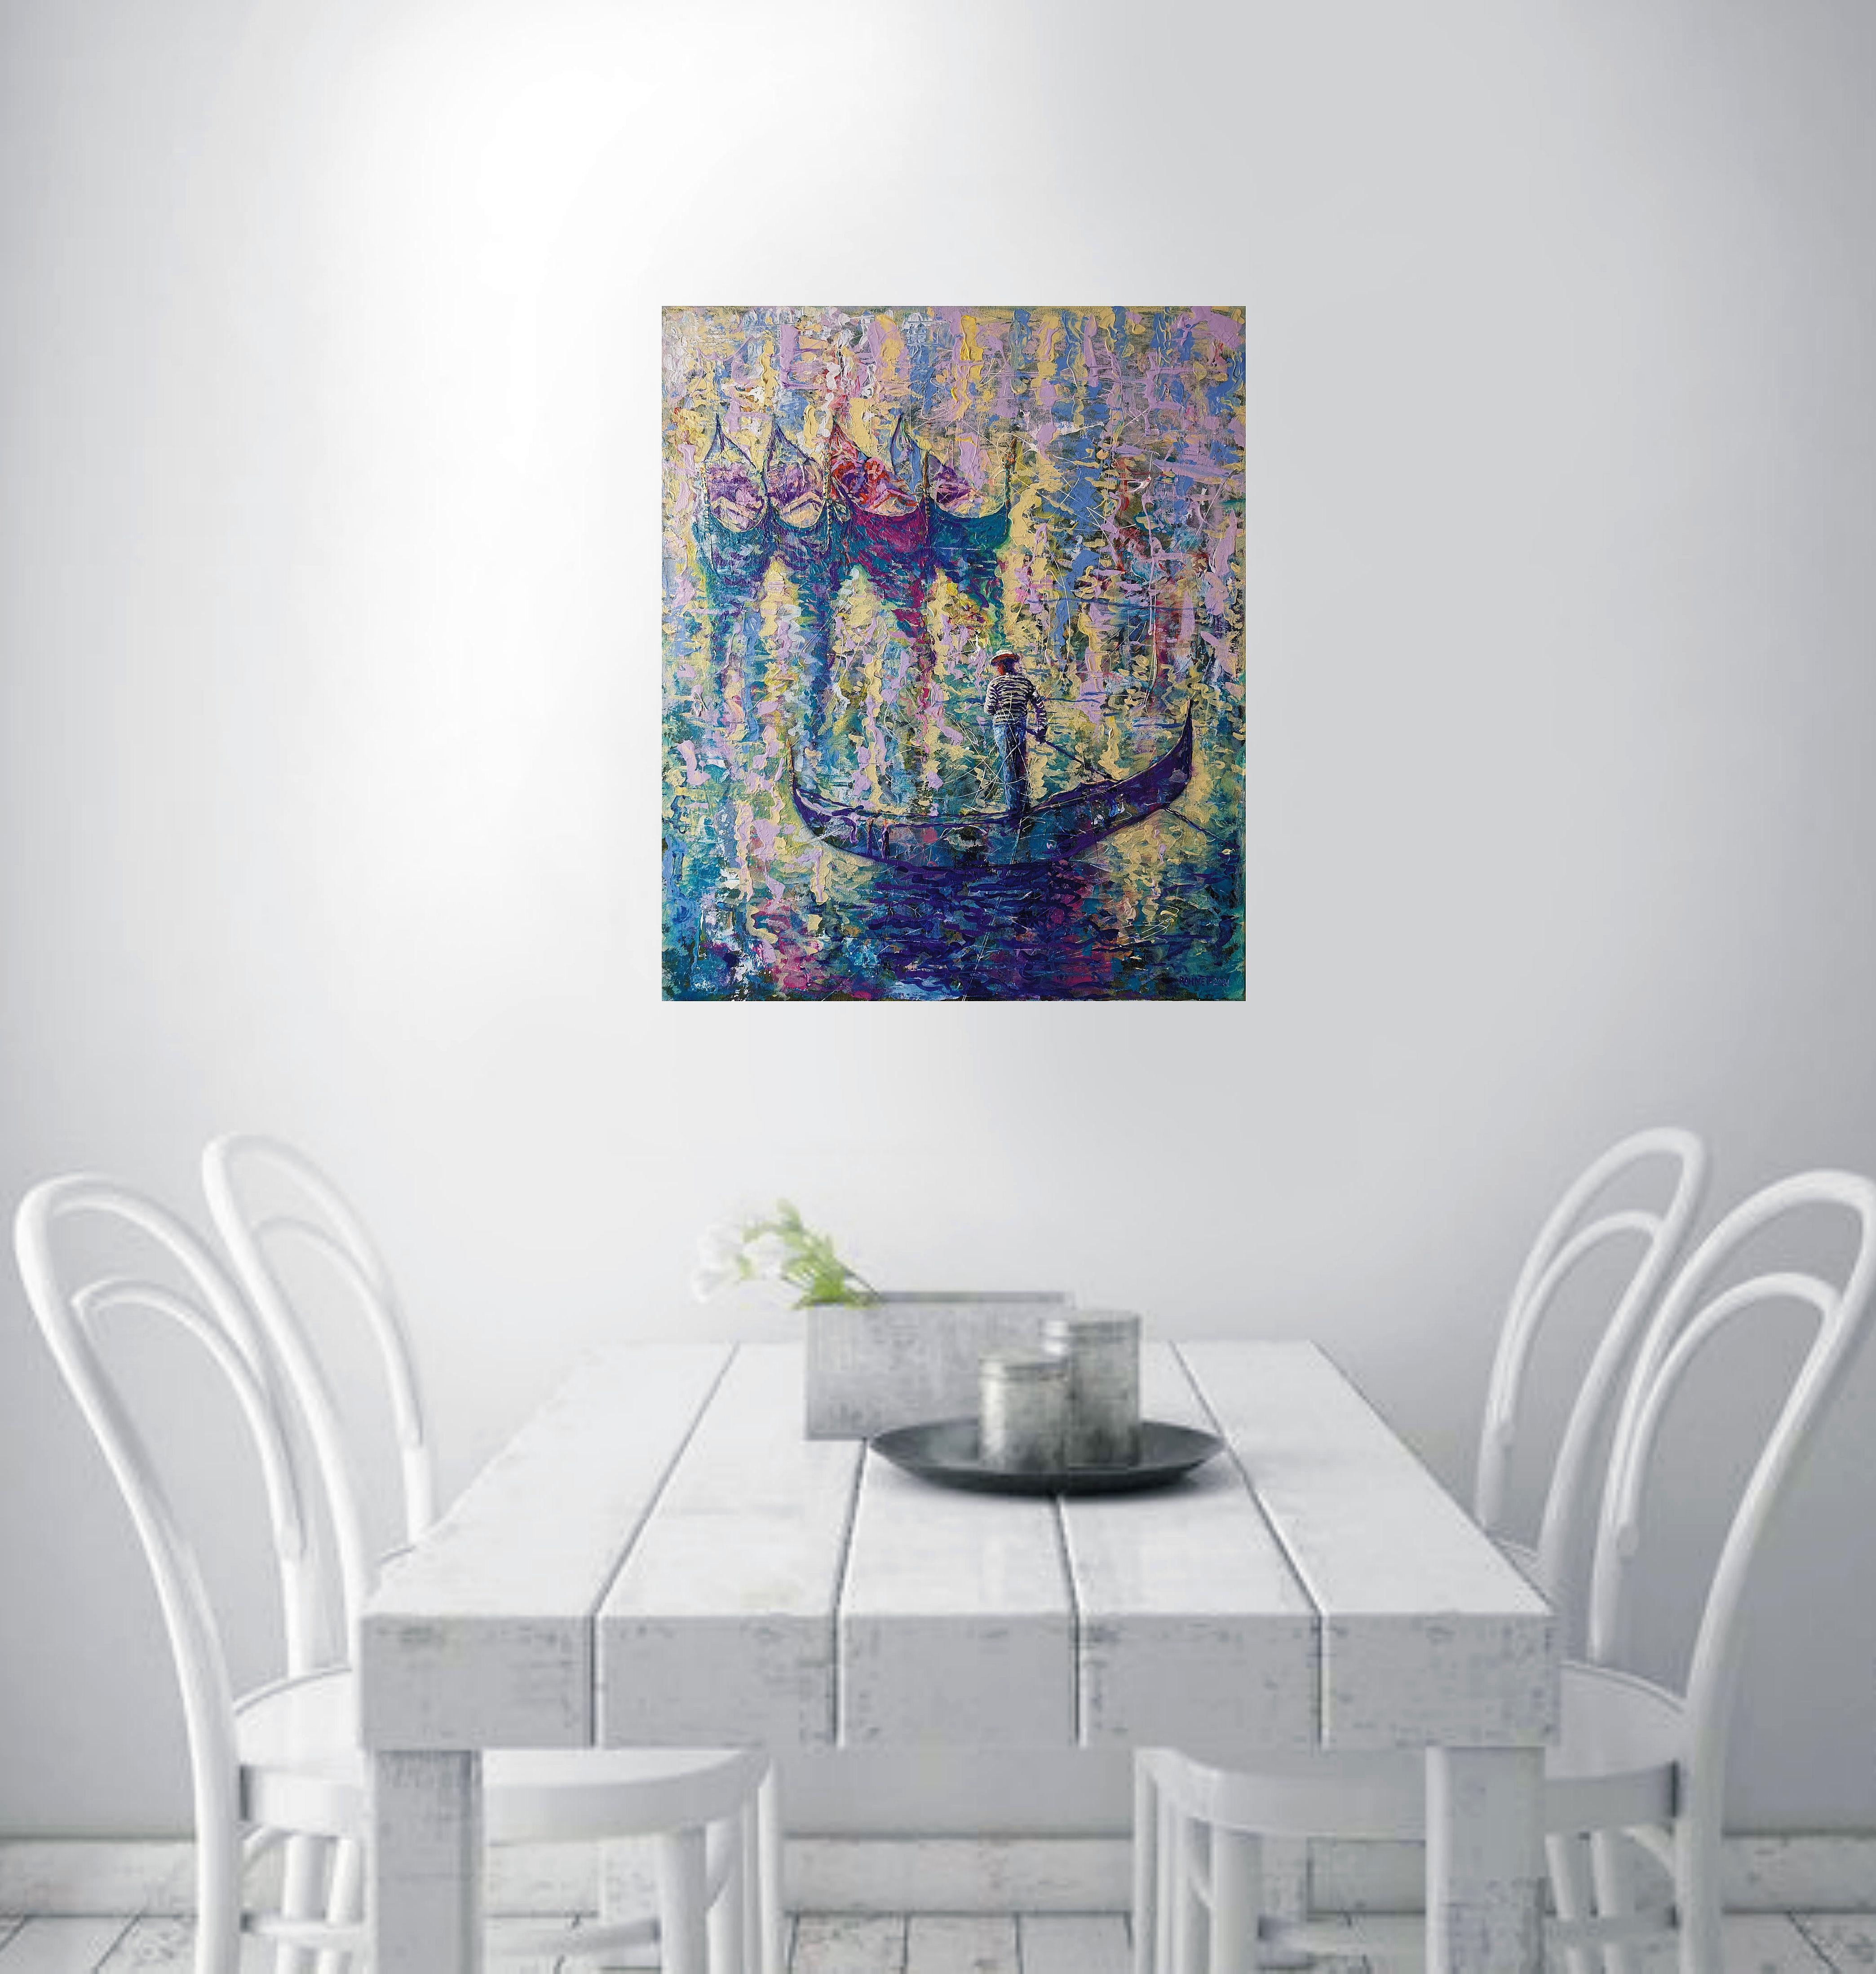 Crafted with vibrant acrylics and textured oils, my painting captures the essence of a dreamy morning. Its impressionistic strokes breathe life into the serene dance of gondolas on water, reflecting a symphony of colors. This artwork is my ode to